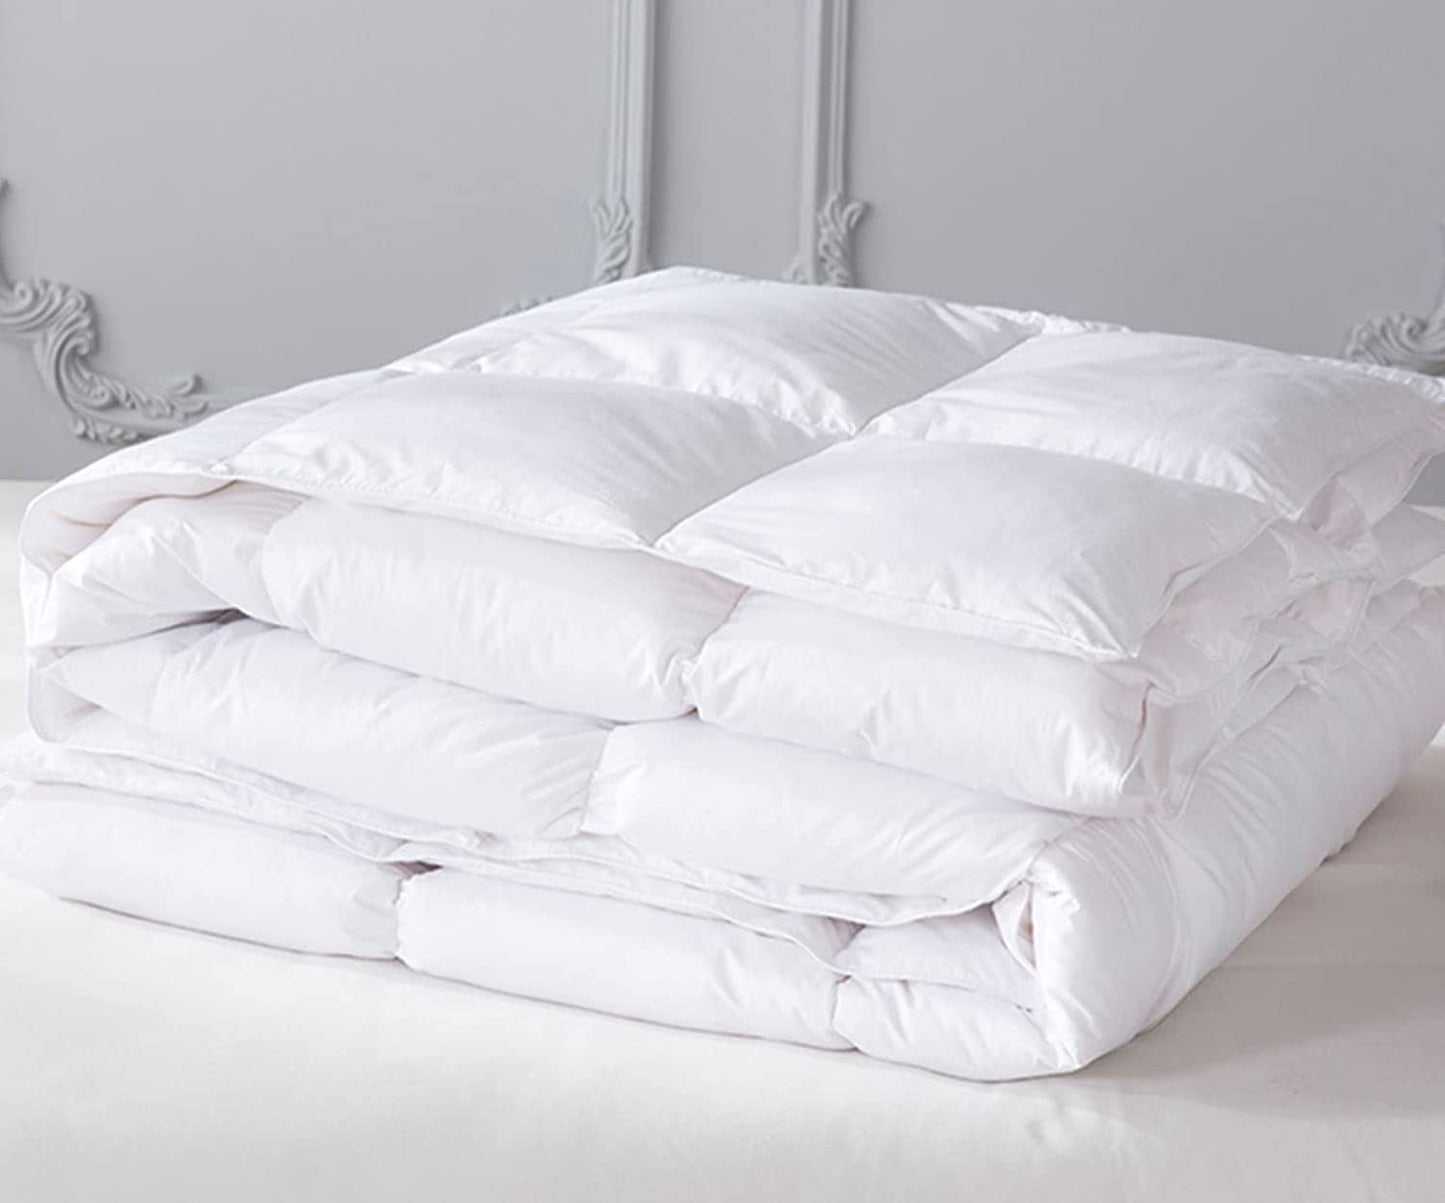 Duck Feather & Down Duvet Hotel Quality Anti-Dust mite Down Quilt Hypoallergenic Super Soft Natural Feather White Duvets, Pure Cotton Down-Proof Casing, Box Stitched